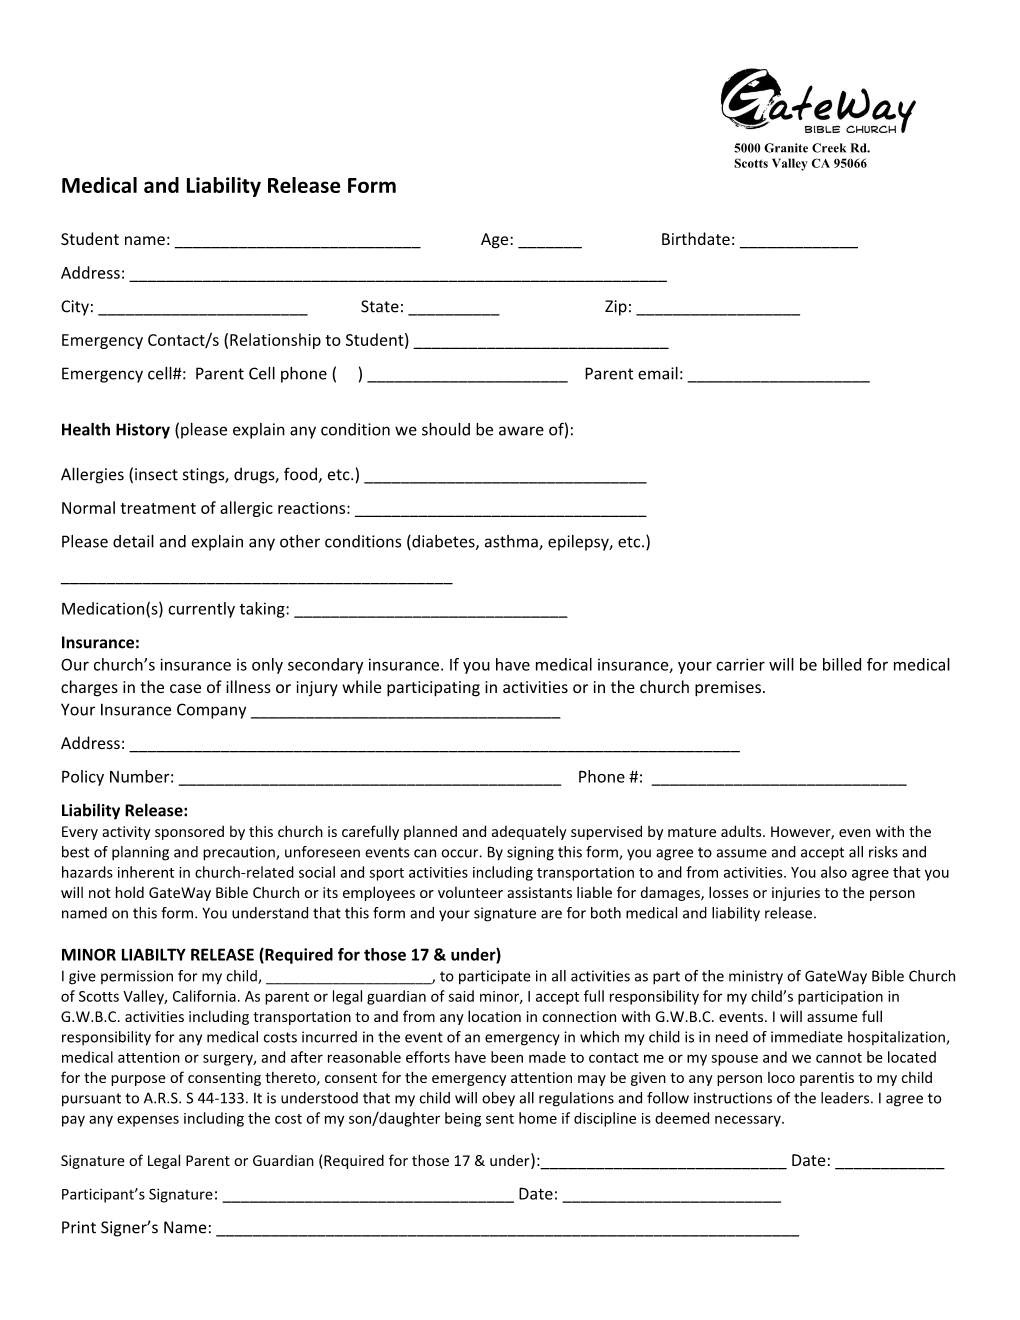 Medical and Liability Release Form